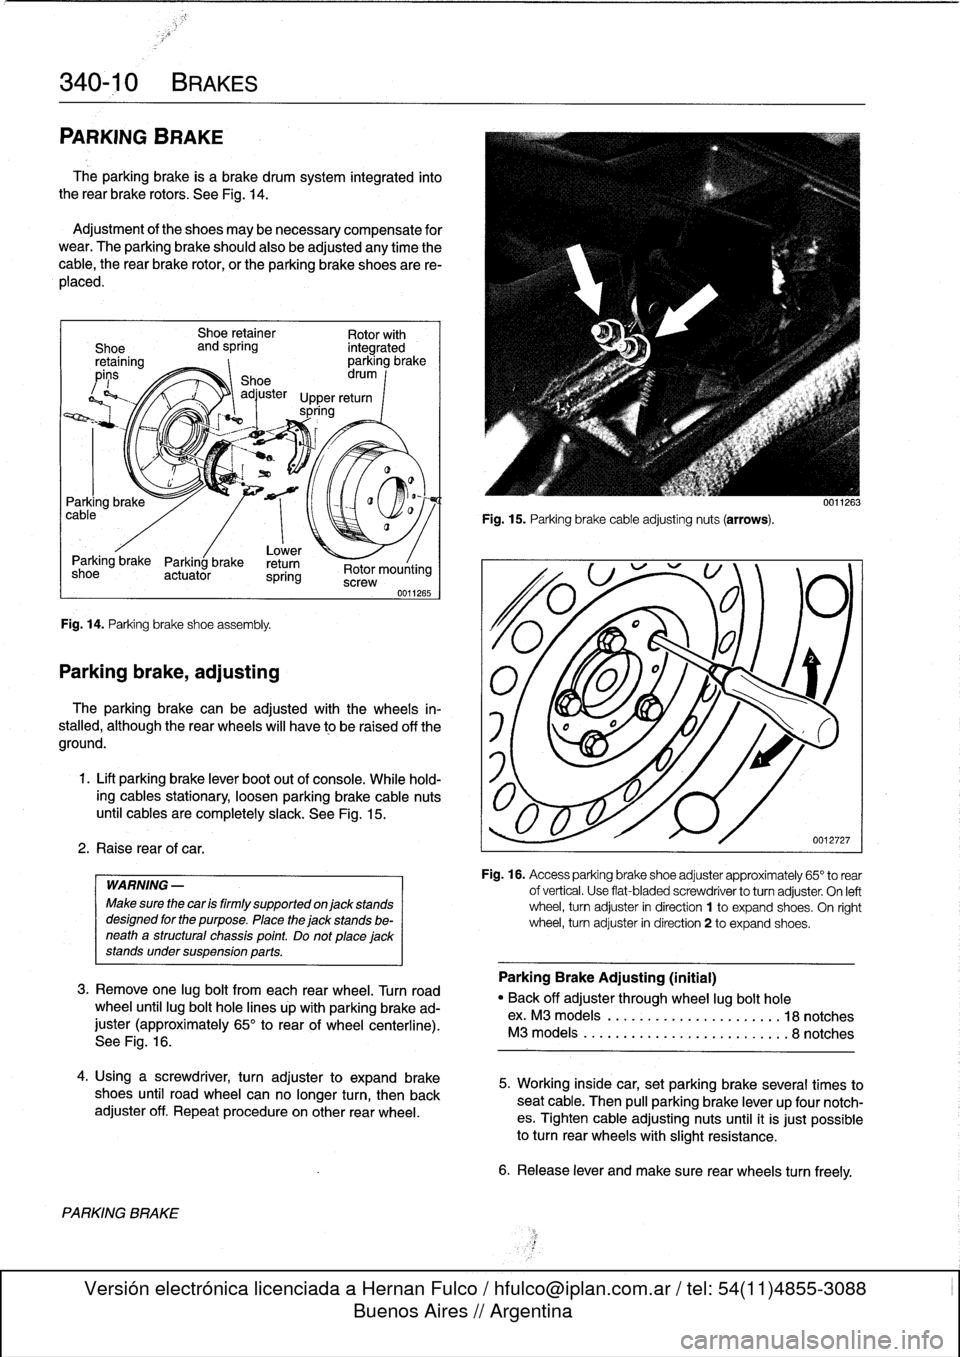 BMW 318i 1996 E36 Workshop Manual 
340-
1
0
BRAKES

PARKING
BRAKE

The
parking
brake
is
a
brake
drum
system
integrated
into
the
rear
brake
rotors
.
See
Fig
.
14
.

Adjustment
of
the
shoes
may
benecessary
compensate
for
wear
.
The
park